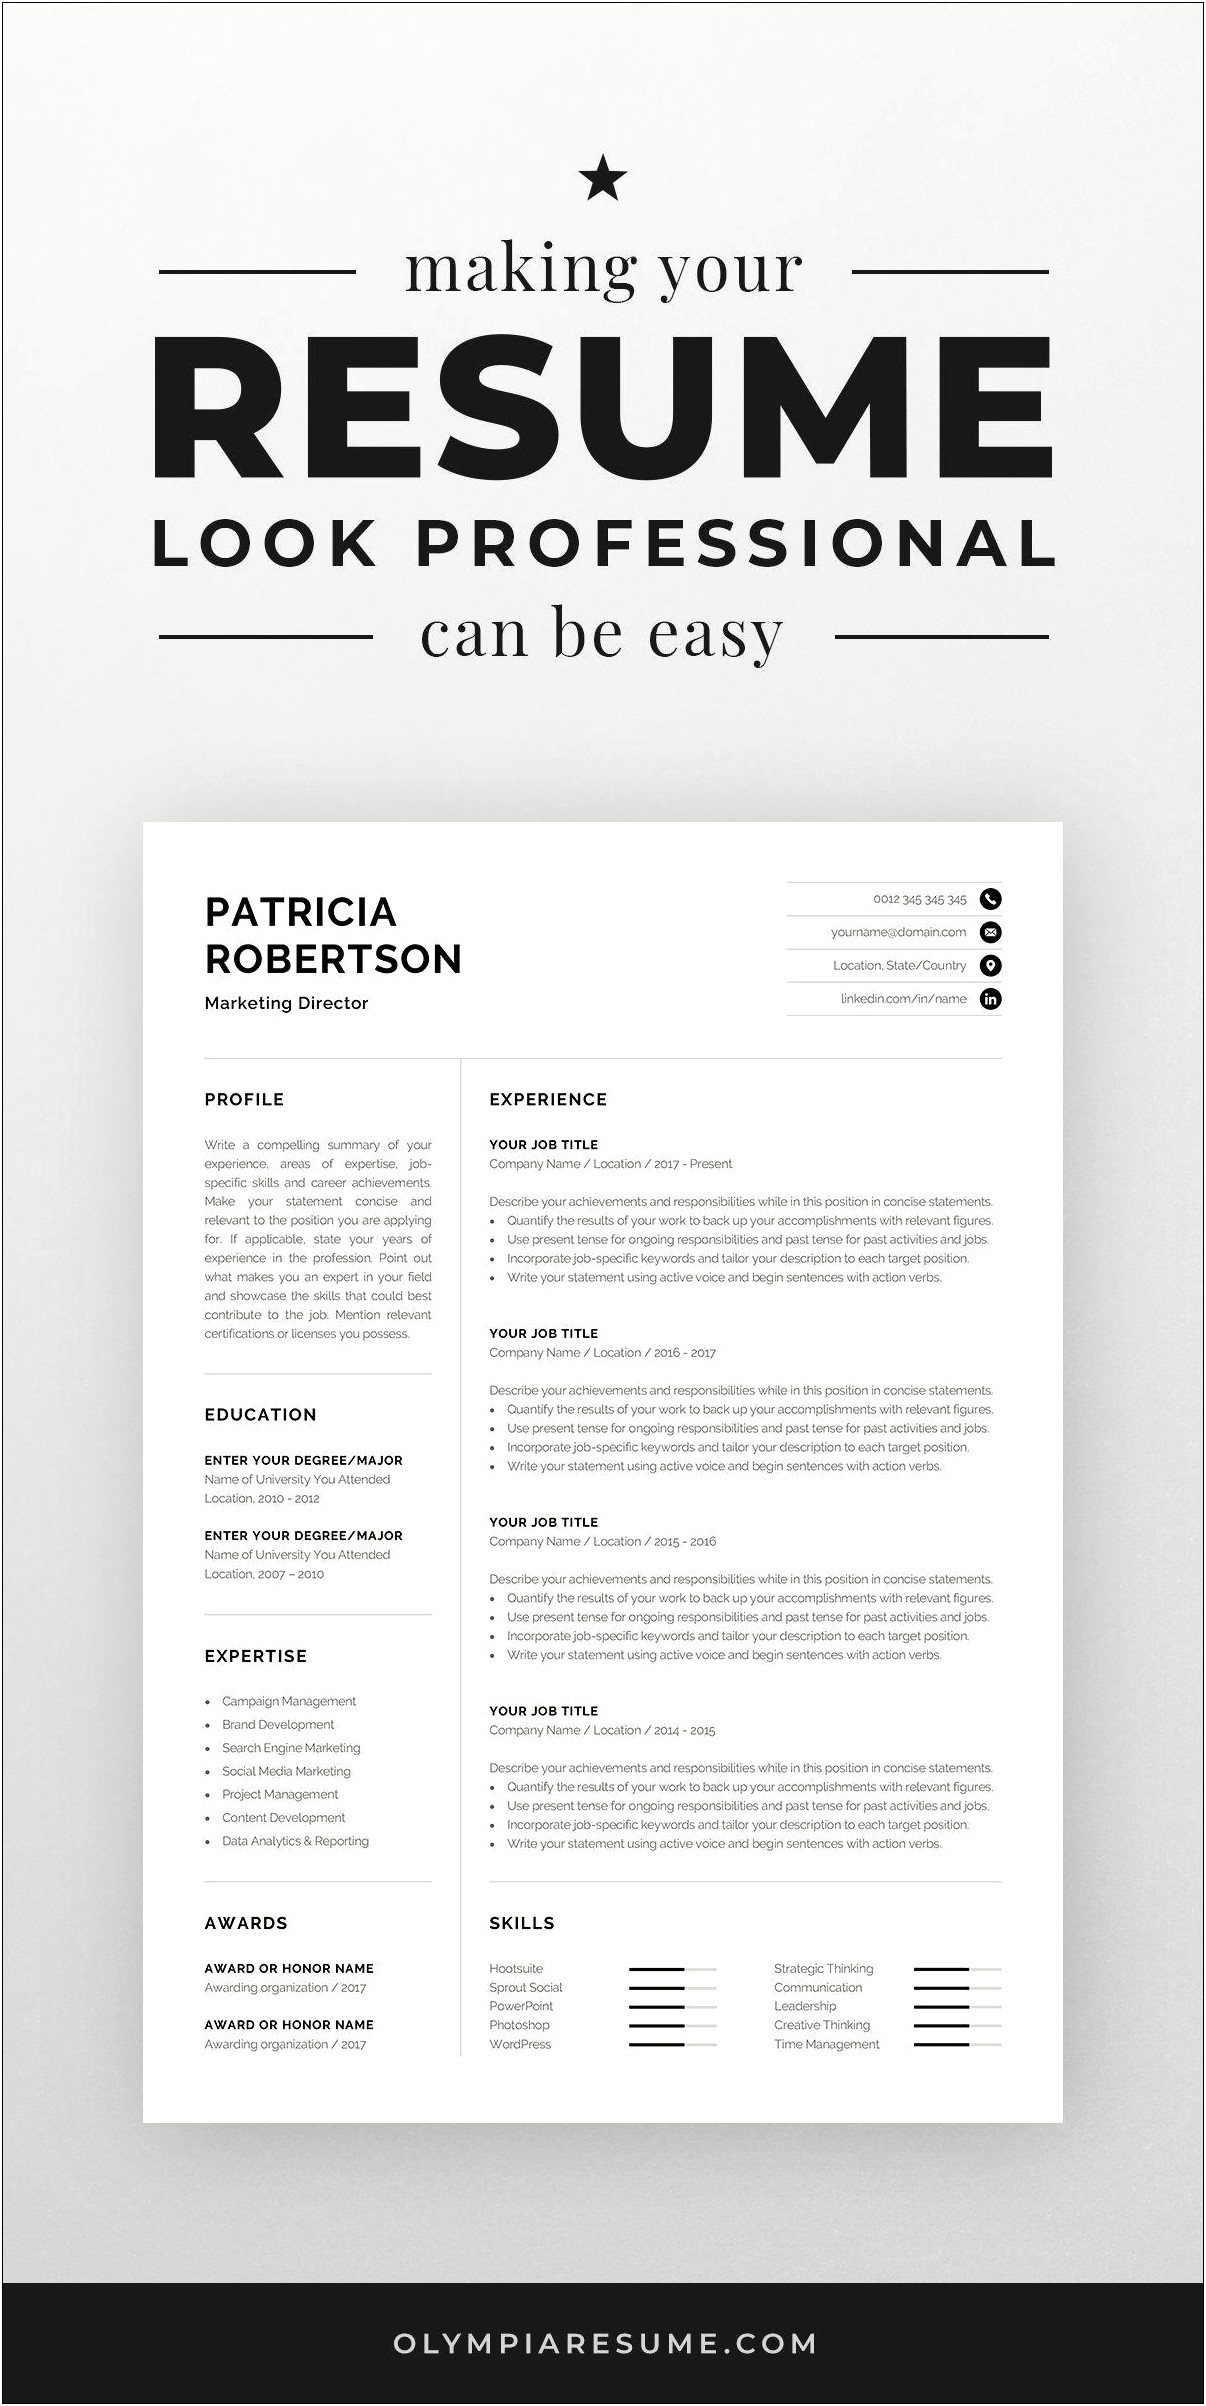 For Resume Instead Of Managed Use Other Phrase